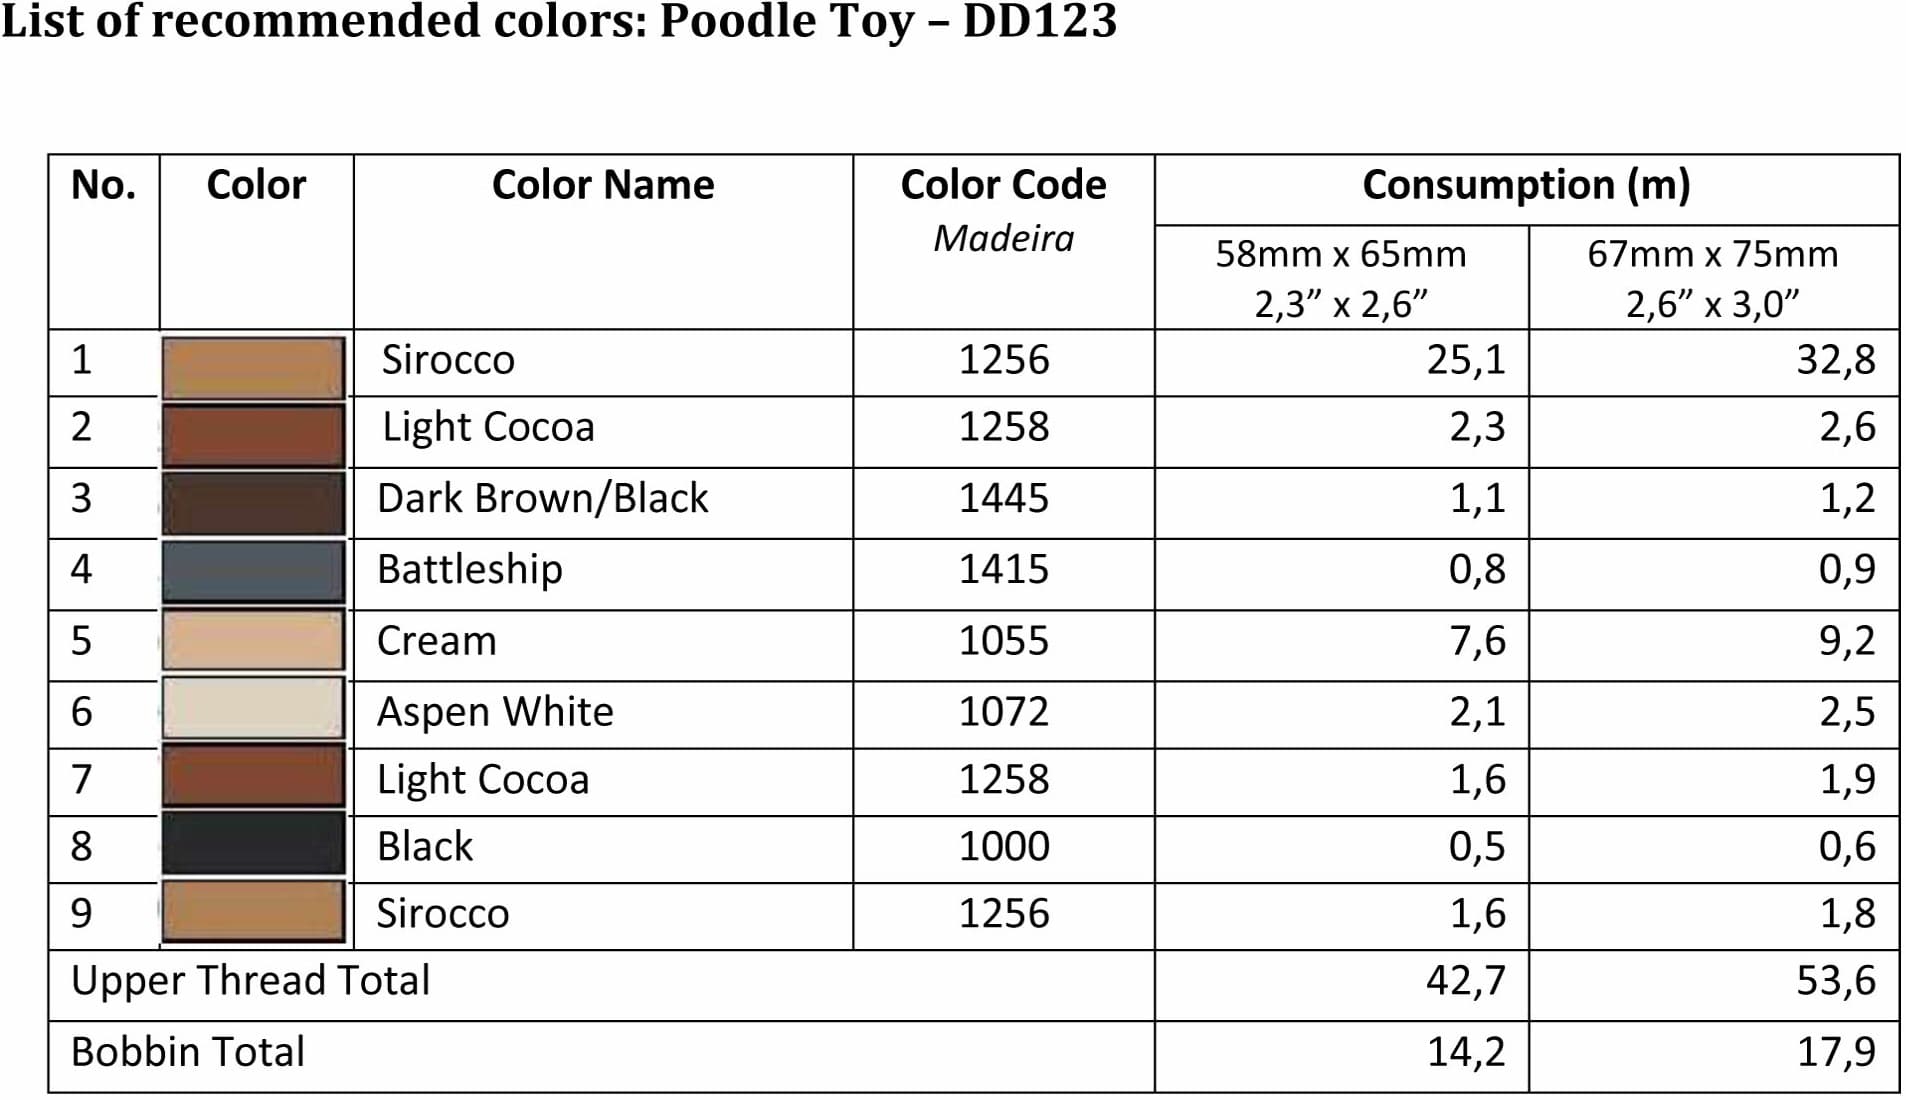 List of Recommended Colors - Poodle Toy DD123